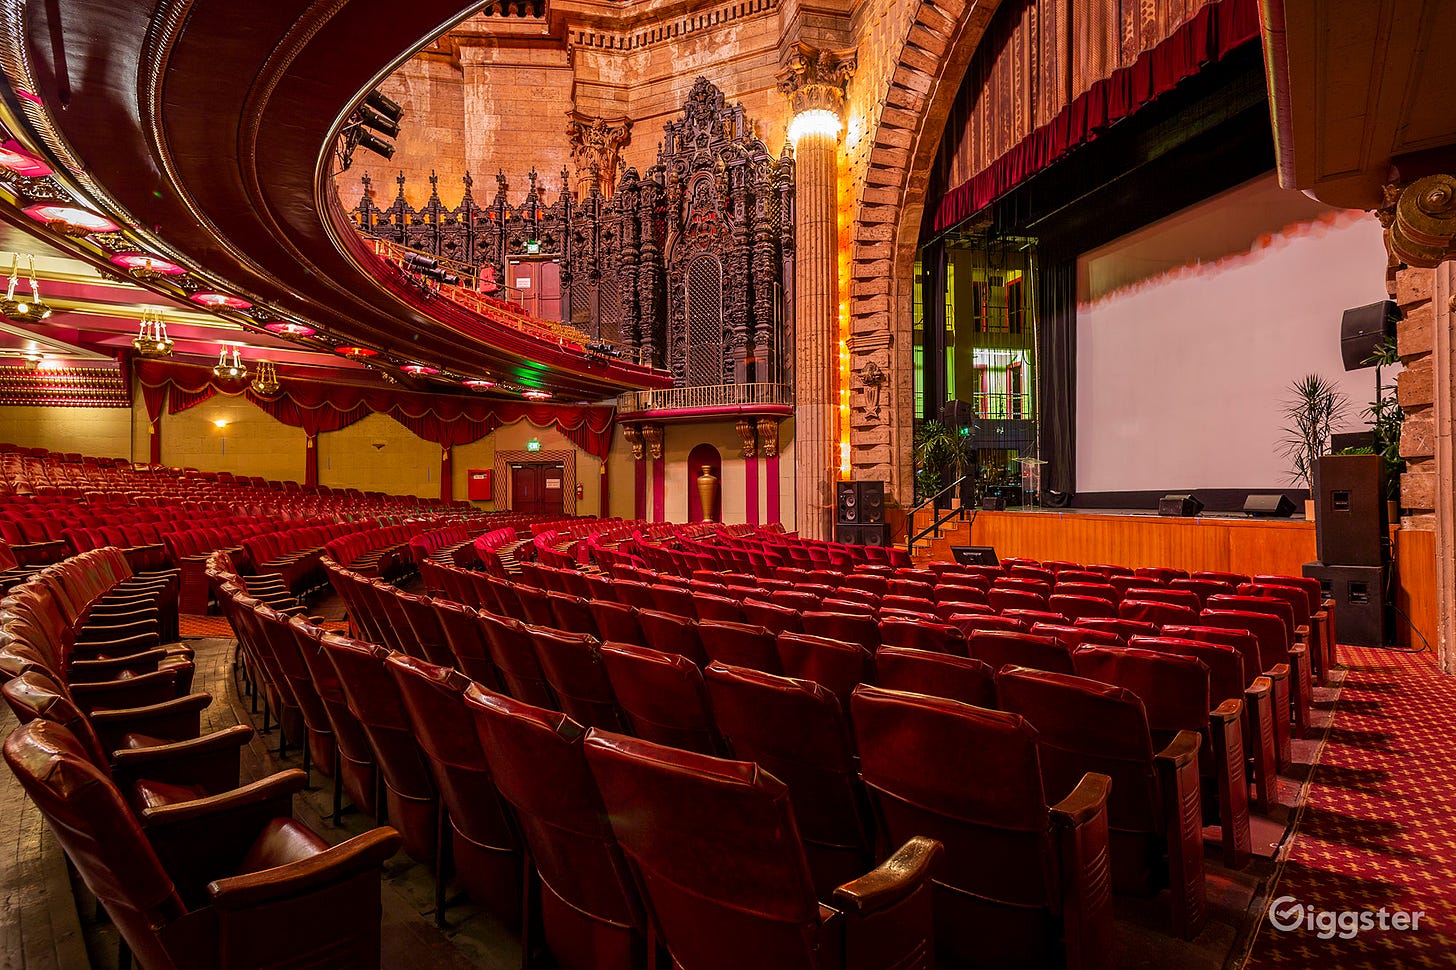 Million Dollar Theatre | Rent this location on Giggster